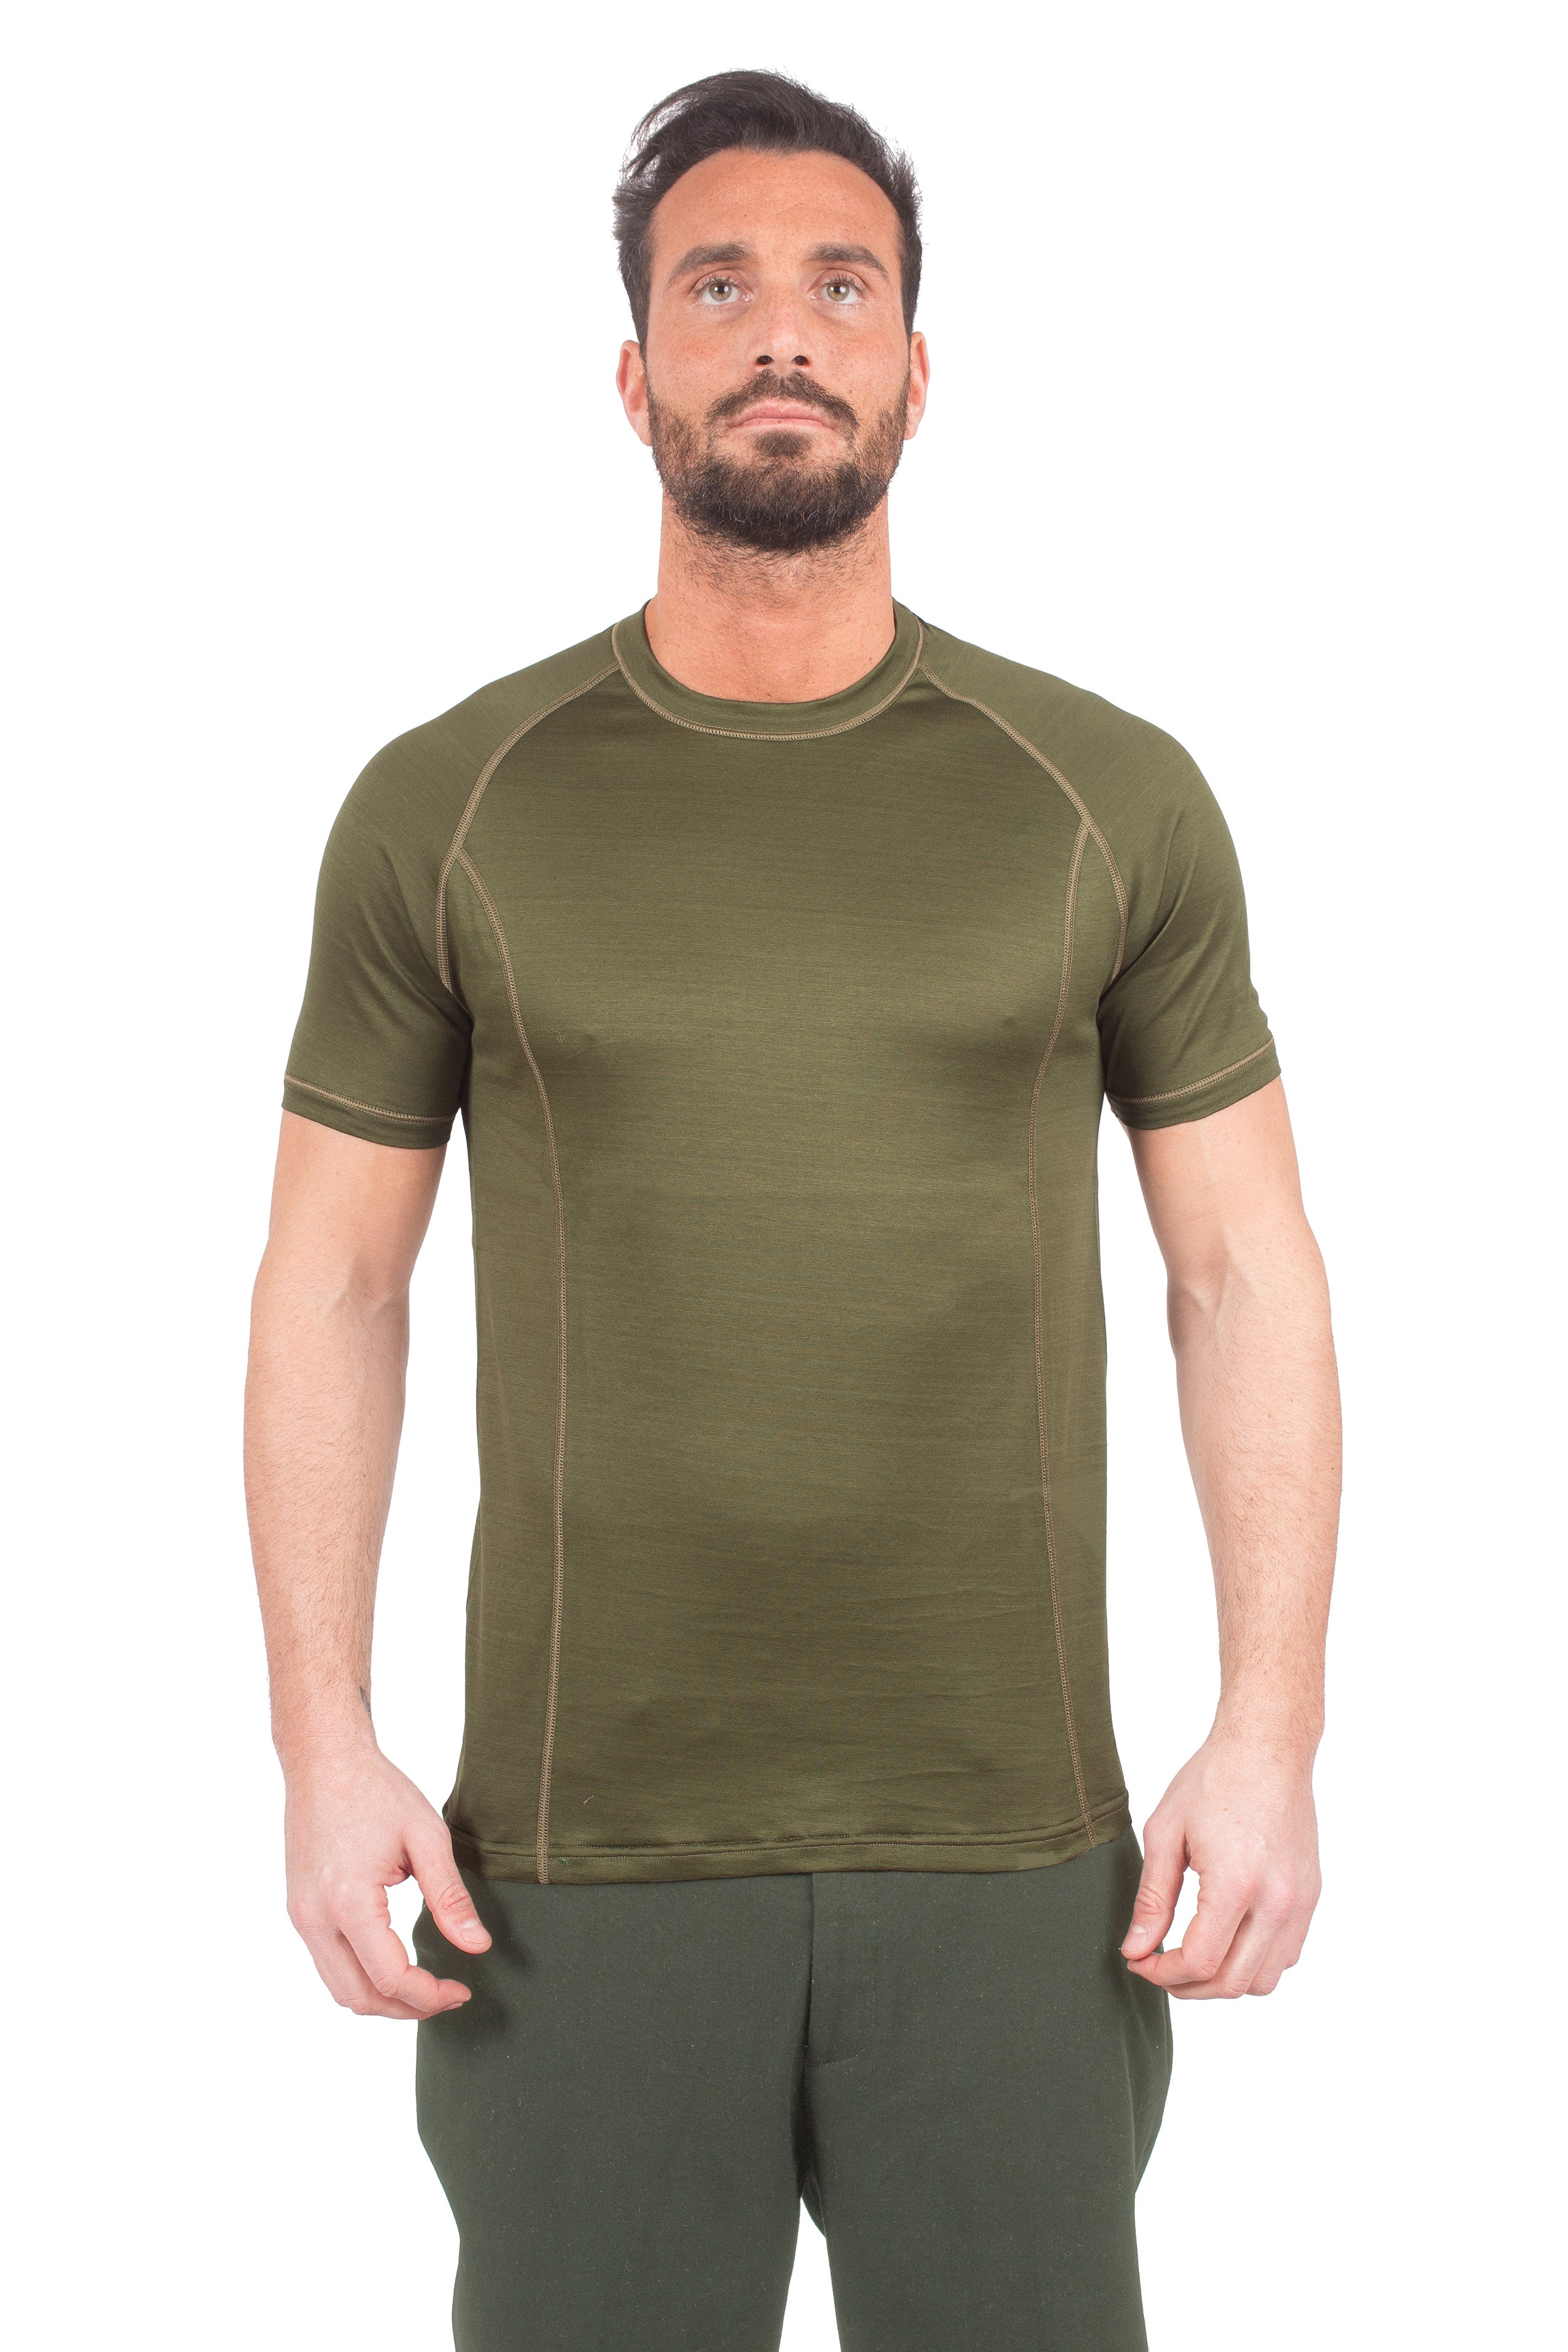 ARMY T-SHIRT OLIVE GREEN